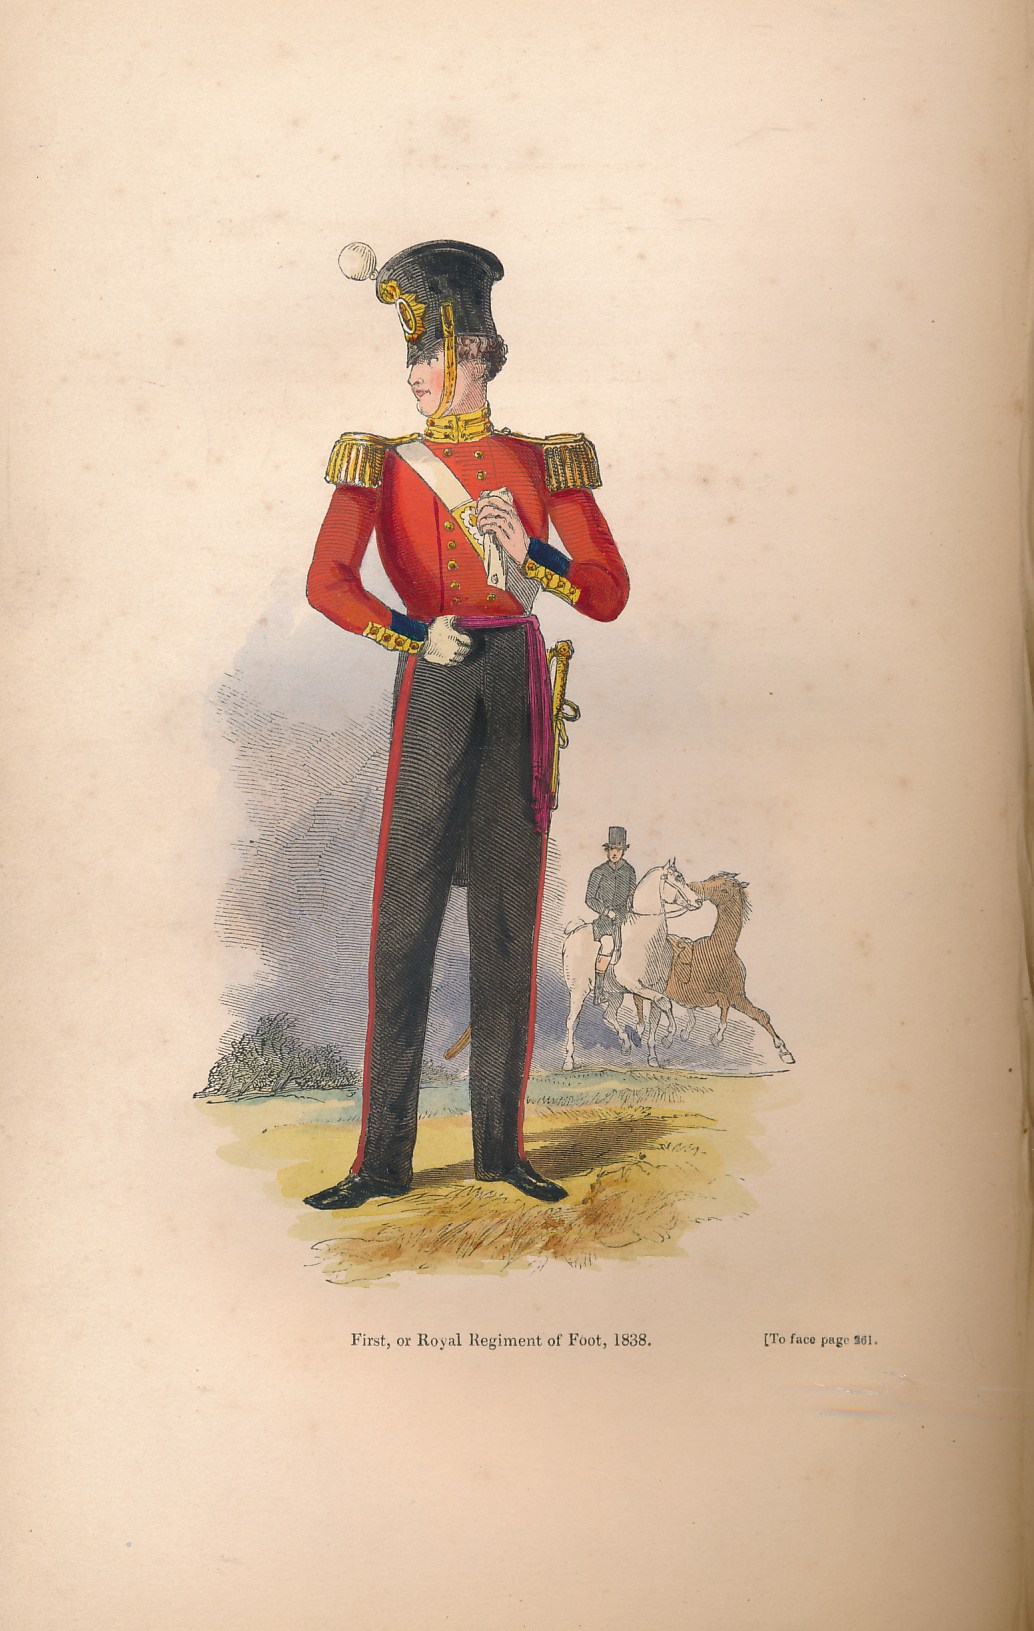 Historical Record of the First, or Royal Regiment of Foot